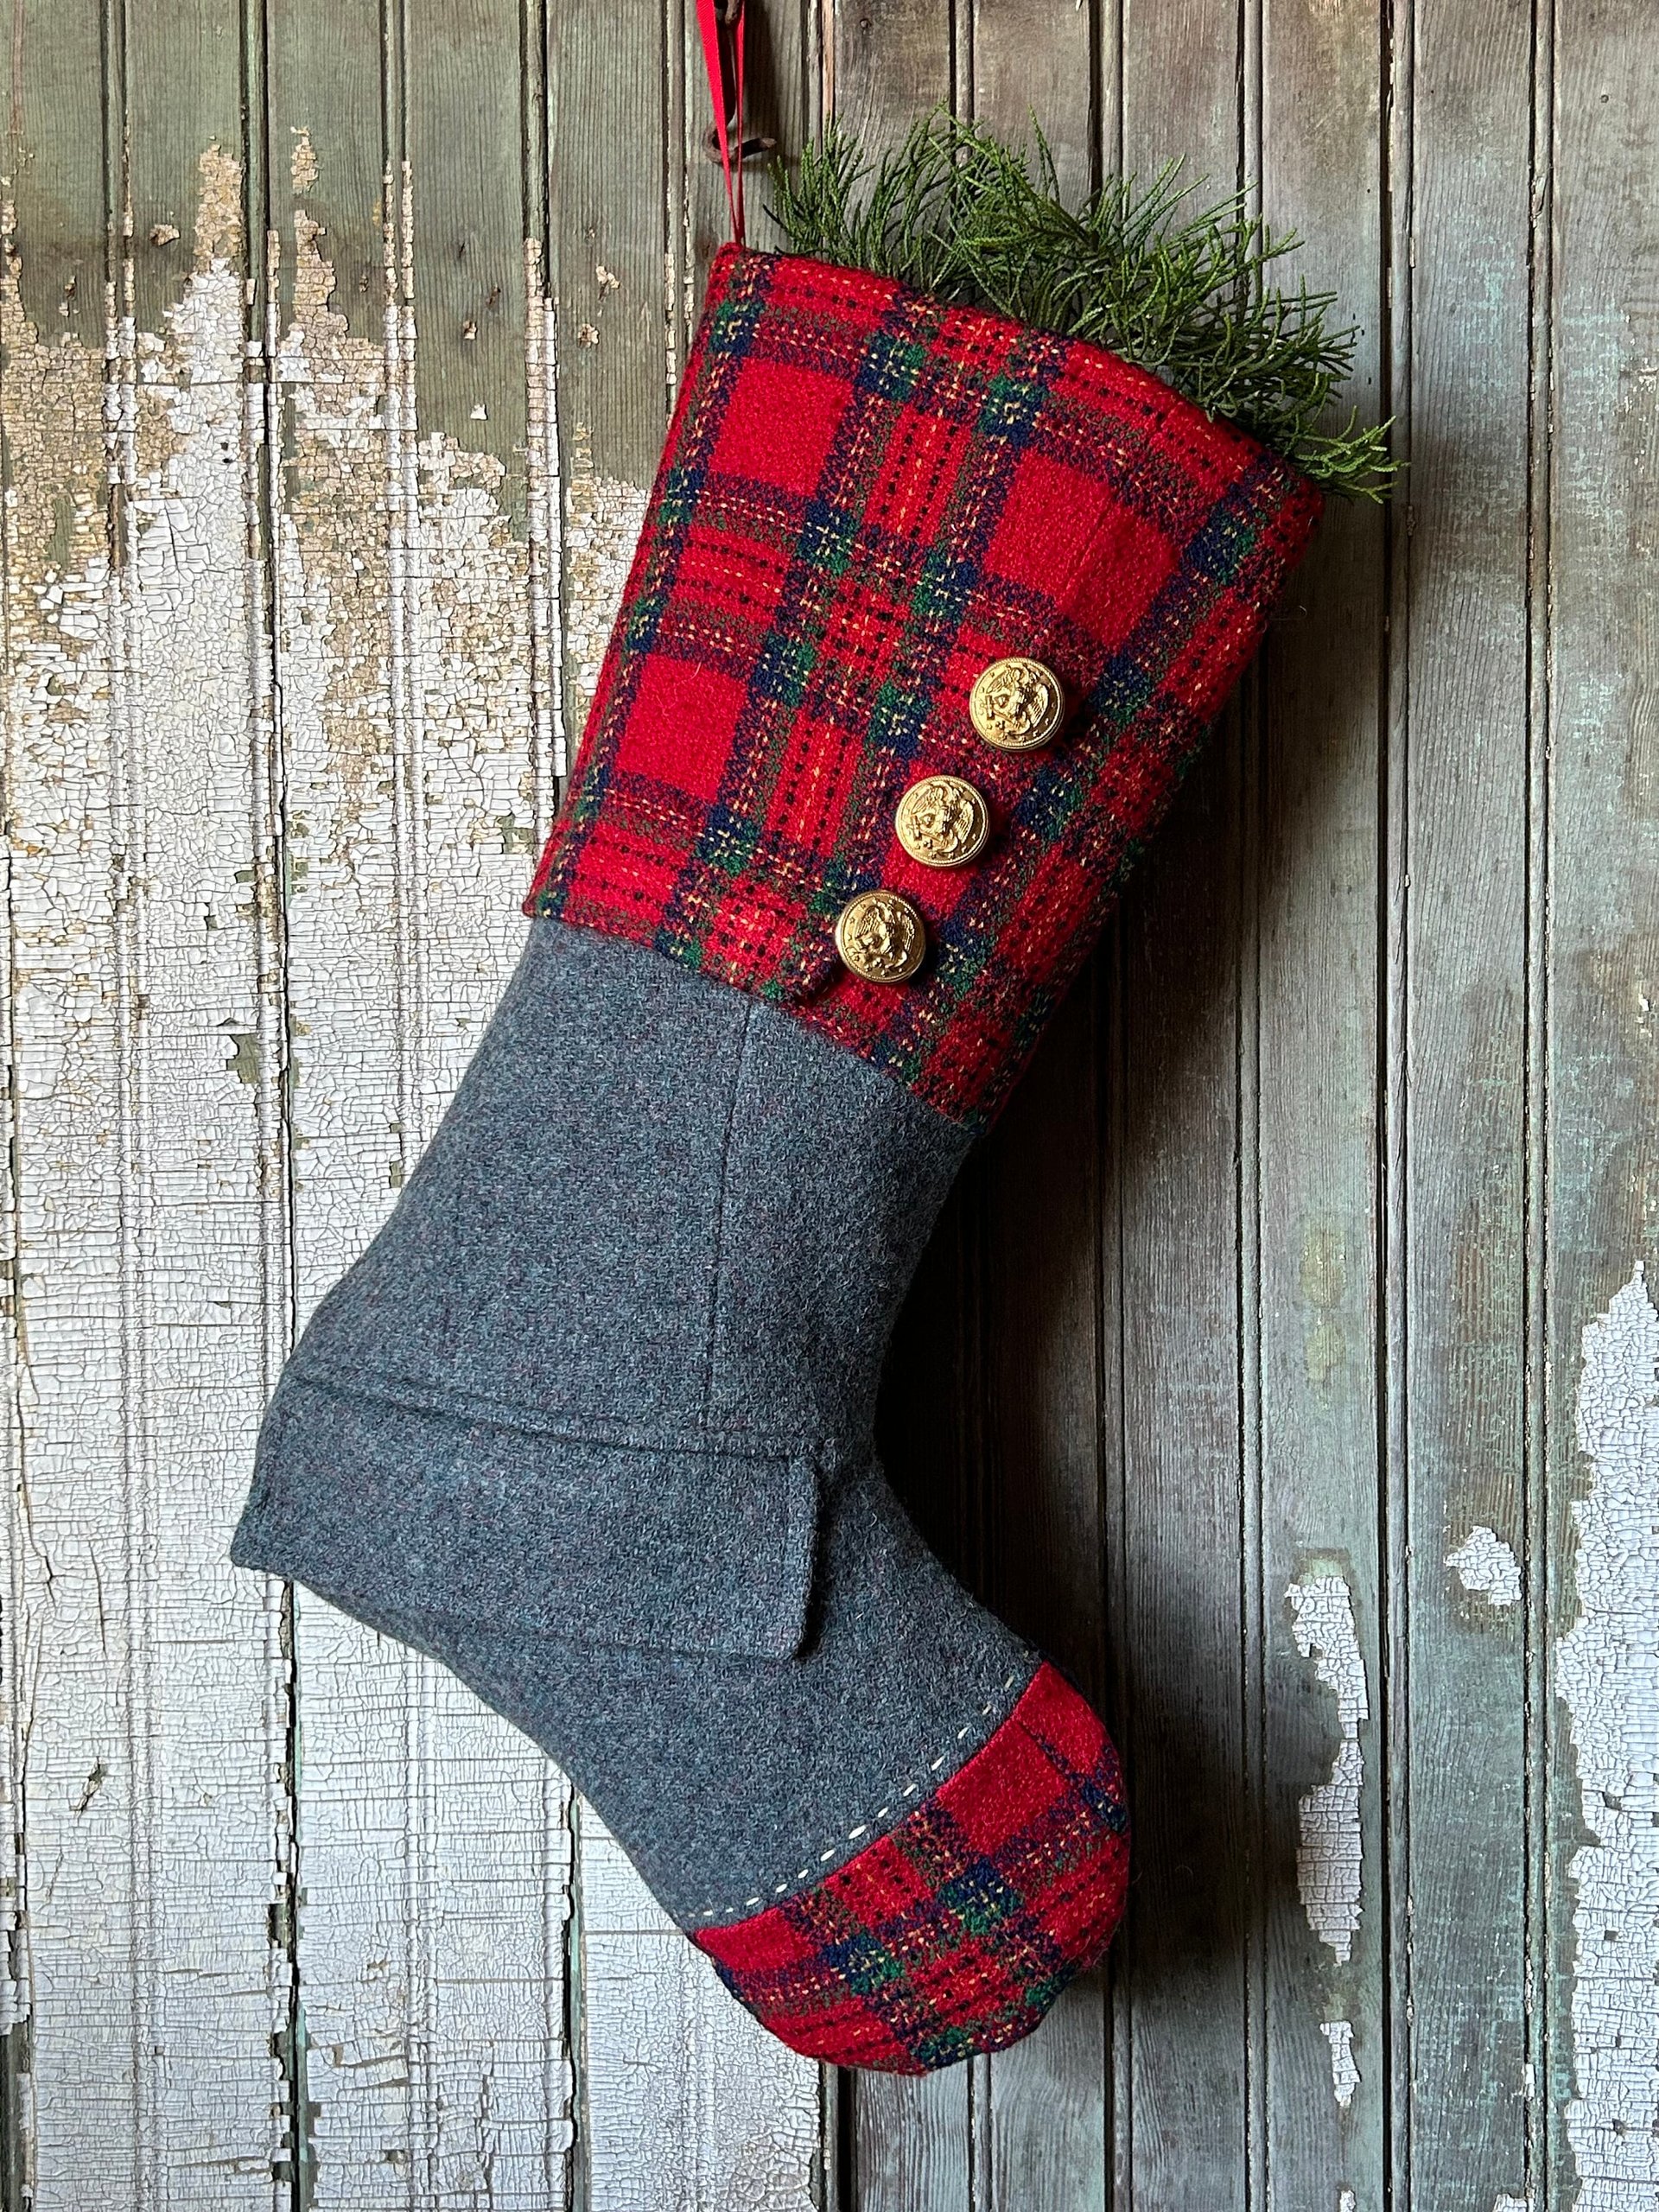 Red Tartan Plaid Christmas Stocking, Recycled Materials